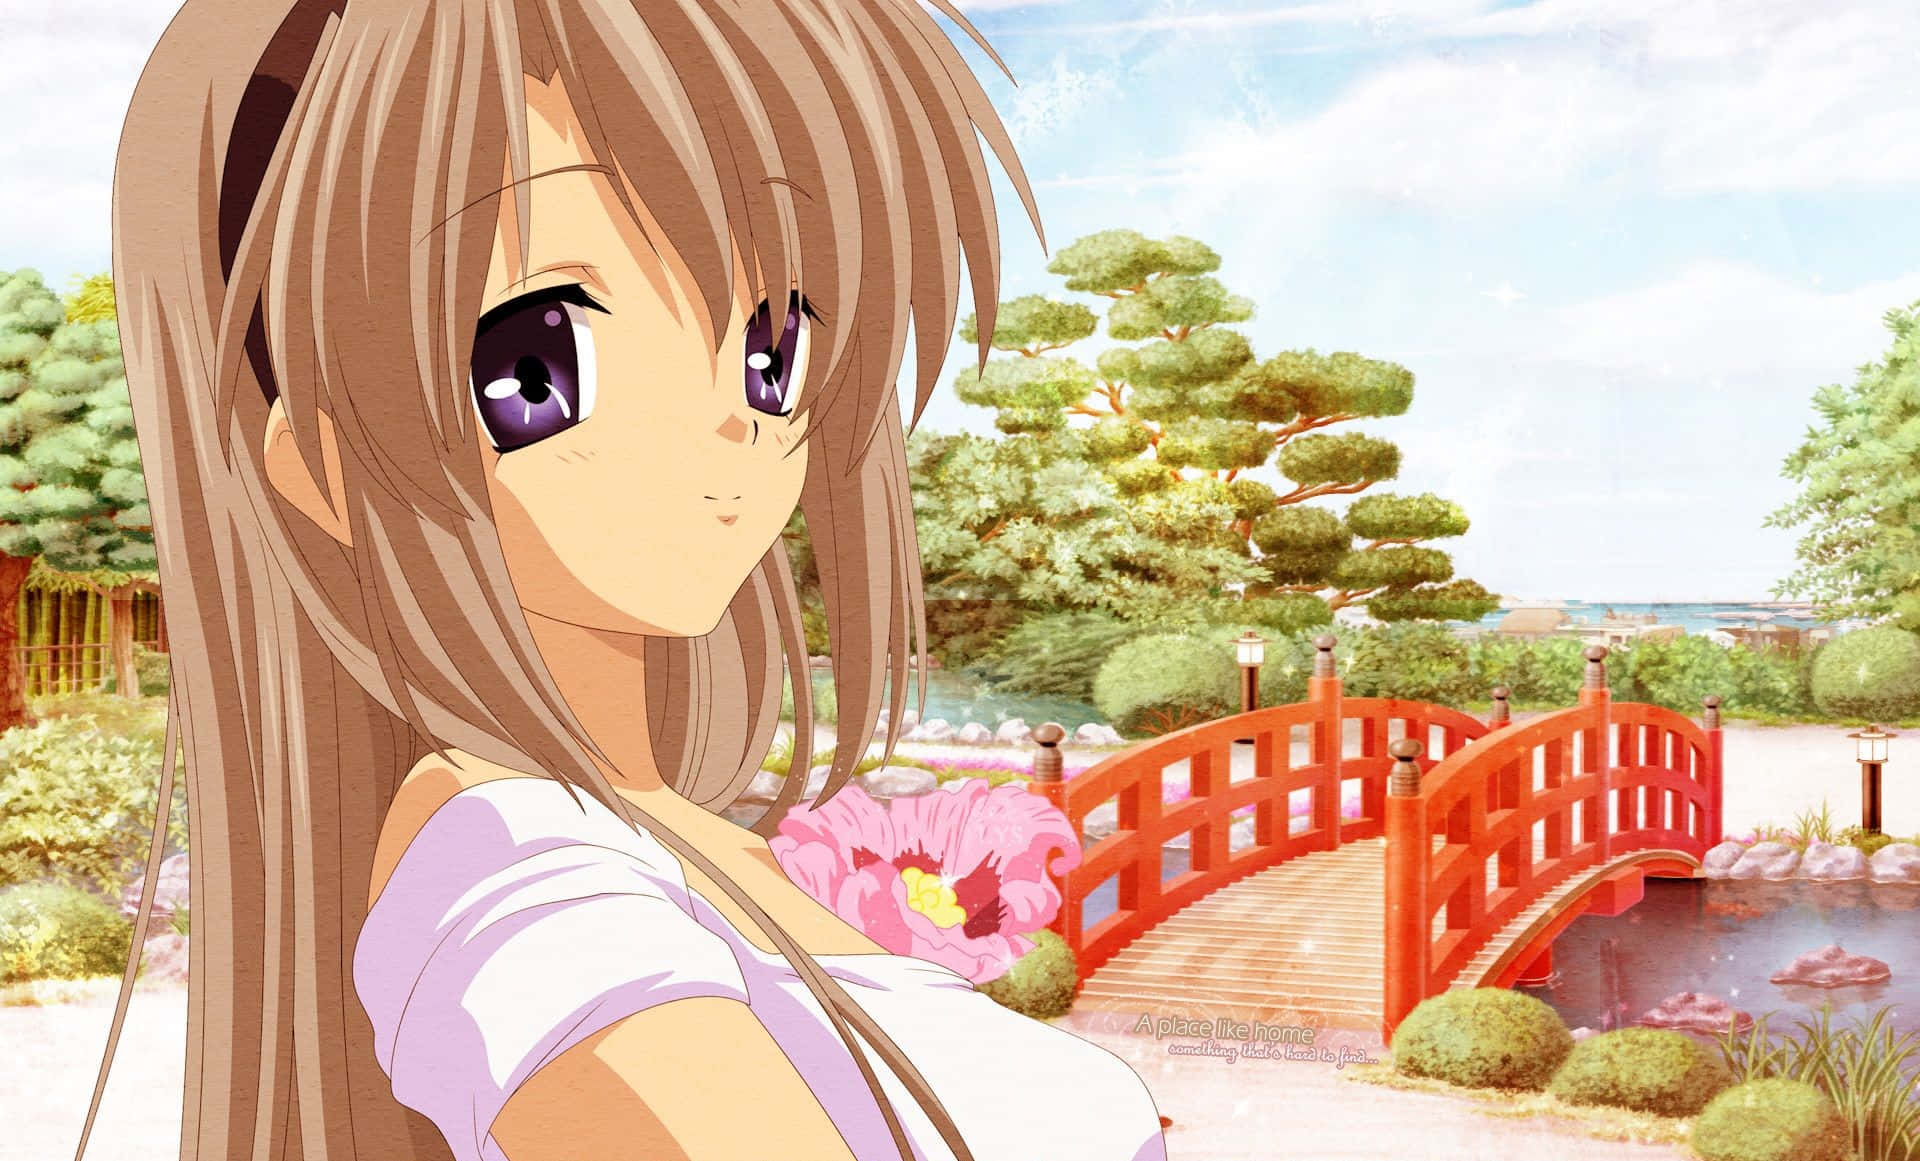 HD clannad characters wallpapers